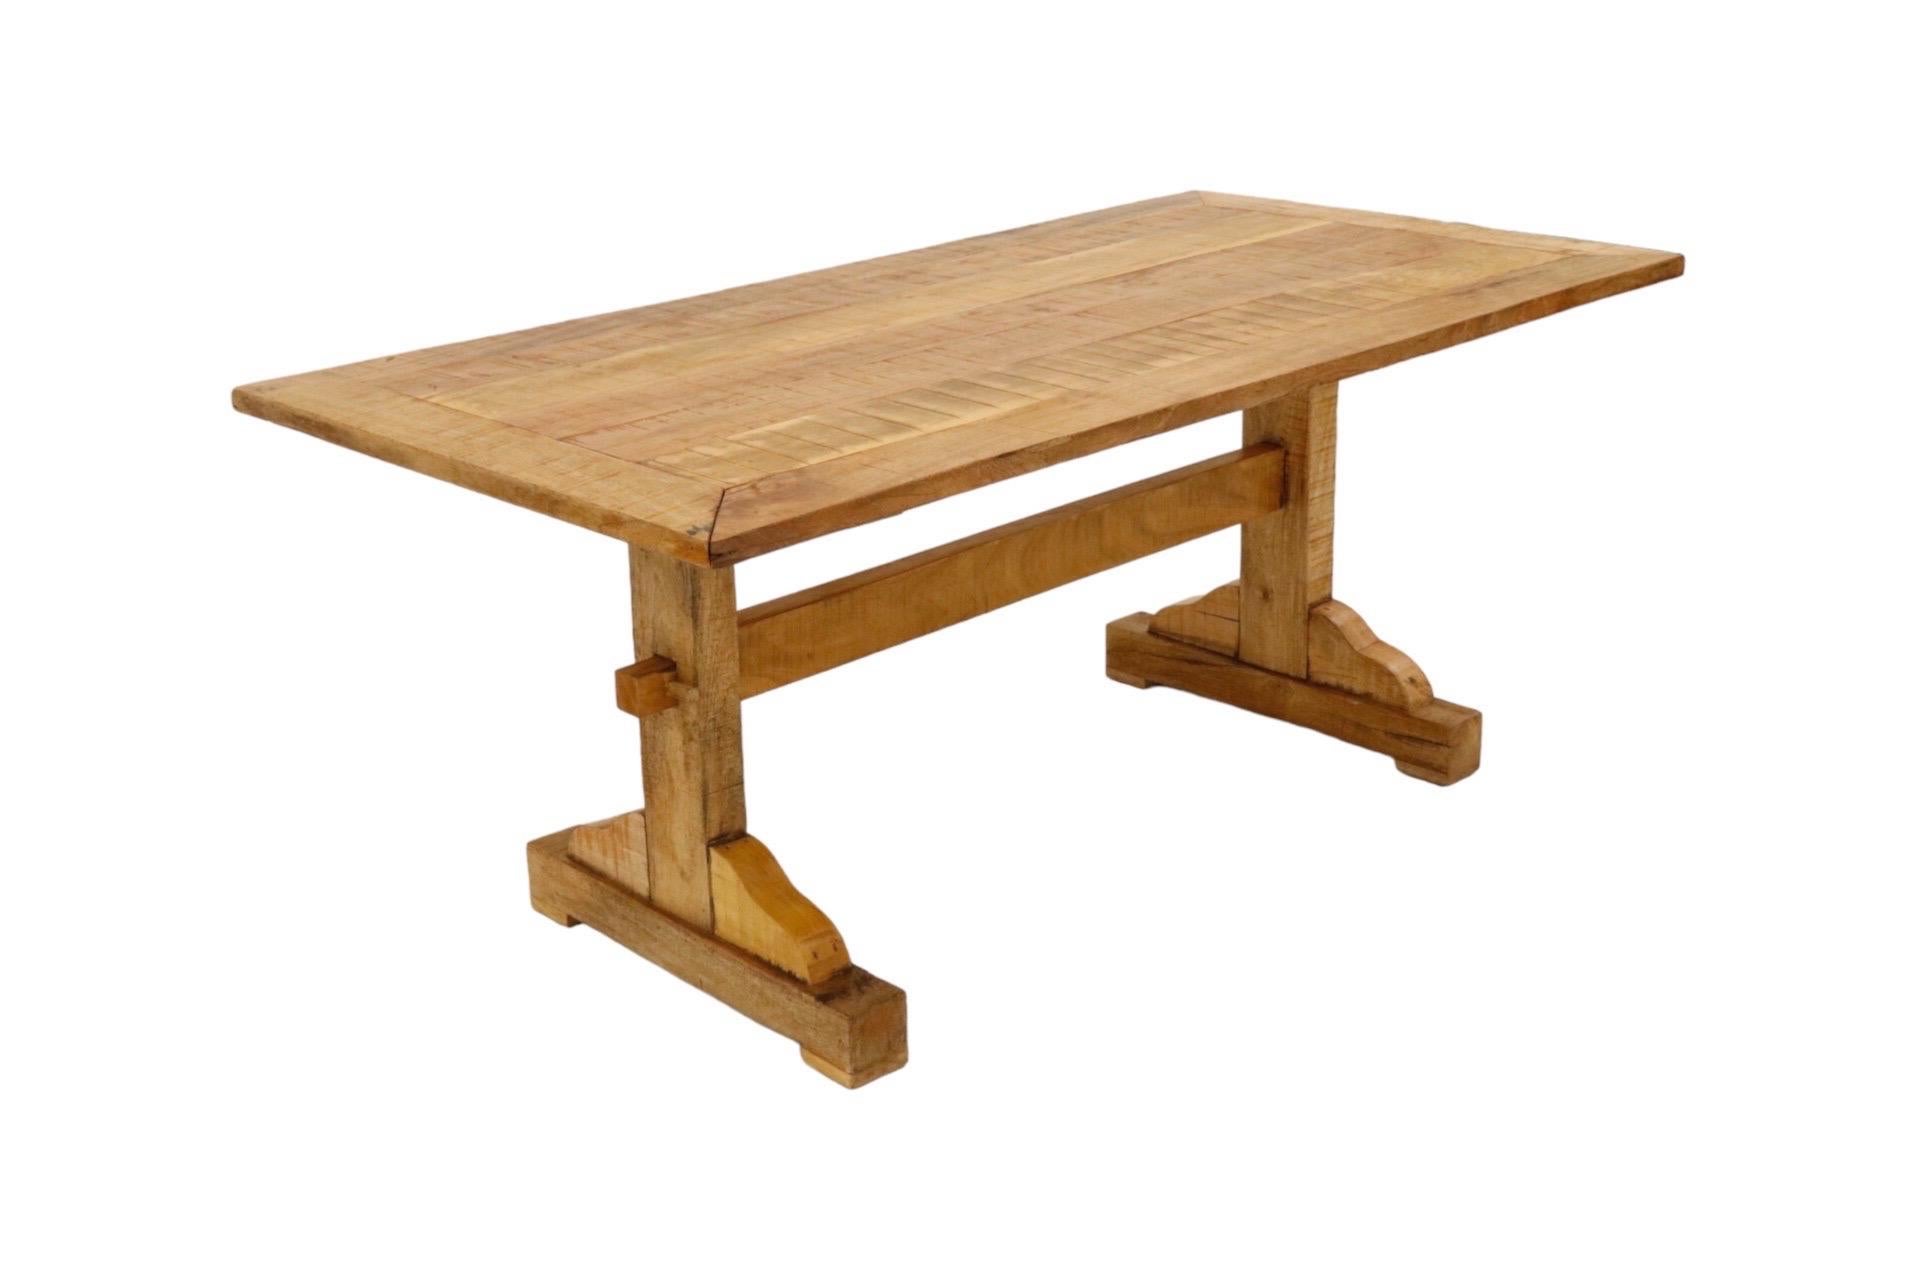 A farmhouse style trestle dining table made of pine. Plank wood forms the tabletop, framed with a wide border. The trestle base consists of two legs supported with a stretcher beam, locked in place with pegs at each side.